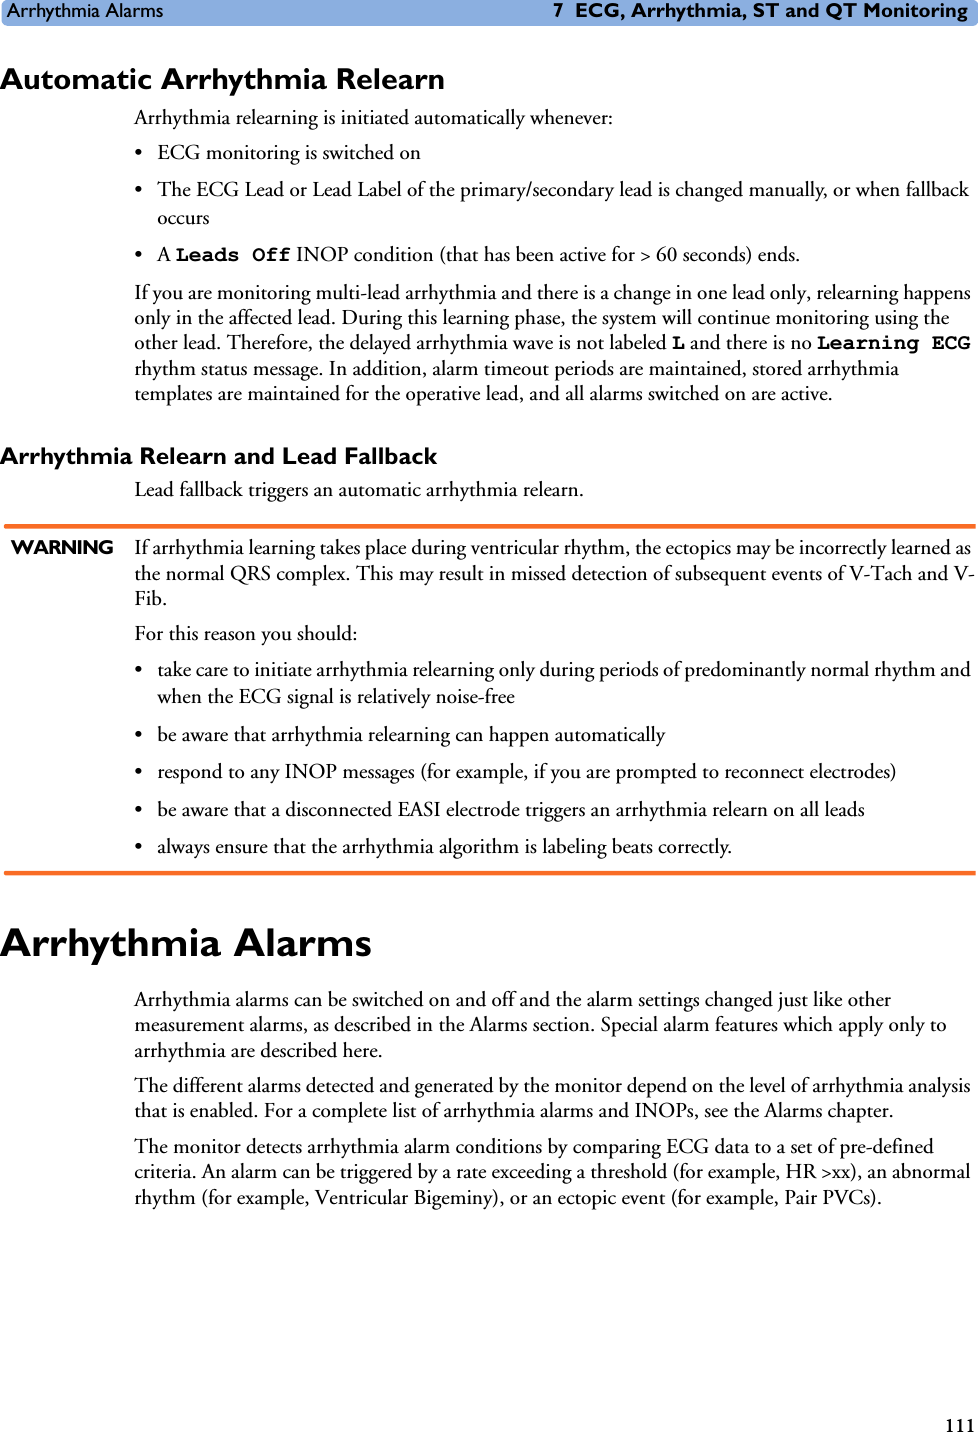 Arrhythmia Alarms 7 ECG, Arrhythmia, ST and QT Monitoring111Automatic Arrhythmia Relearn Arrhythmia relearning is initiated automatically whenever:• ECG monitoring is switched on• The ECG Lead or Lead Label of the primary/secondary lead is changed manually, or when fallback occurs•A Leads Off INOP condition (that has been active for &gt; 60 seconds) ends.If you are monitoring multi-lead arrhythmia and there is a change in one lead only, relearning happens only in the affected lead. During this learning phase, the system will continue monitoring using the other lead. Therefore, the delayed arrhythmia wave is not labeled L and there is no Learning ECG rhythm status message. In addition, alarm timeout periods are maintained, stored arrhythmia templates are maintained for the operative lead, and all alarms switched on are active.Arrhythmia Relearn and Lead FallbackLead fallback triggers an automatic arrhythmia relearn.WARNING If arrhythmia learning takes place during ventricular rhythm, the ectopics may be incorrectly learned as the normal QRS complex. This may result in missed detection of subsequent events of V-Tach and V-Fib. For this reason you should: • take care to initiate arrhythmia relearning only during periods of predominantly normal rhythm and when the ECG signal is relatively noise-free• be aware that arrhythmia relearning can happen automatically• respond to any INOP messages (for example, if you are prompted to reconnect electrodes)• be aware that a disconnected EASI electrode triggers an arrhythmia relearn on all leads• always ensure that the arrhythmia algorithm is labeling beats correctly.Arrhythmia Alarms Arrhythmia alarms can be switched on and off and the alarm settings changed just like other measurement alarms, as described in the Alarms section. Special alarm features which apply only to arrhythmia are described here. The different alarms detected and generated by the monitor depend on the level of arrhythmia analysis that is enabled. For a complete list of arrhythmia alarms and INOPs, see the Alarms chapter. The monitor detects arrhythmia alarm conditions by comparing ECG data to a set of pre-defined criteria. An alarm can be triggered by a rate exceeding a threshold (for example, HR &gt;xx), an abnormal rhythm (for example, Ventricular Bigeminy), or an ectopic event (for example, Pair PVCs).